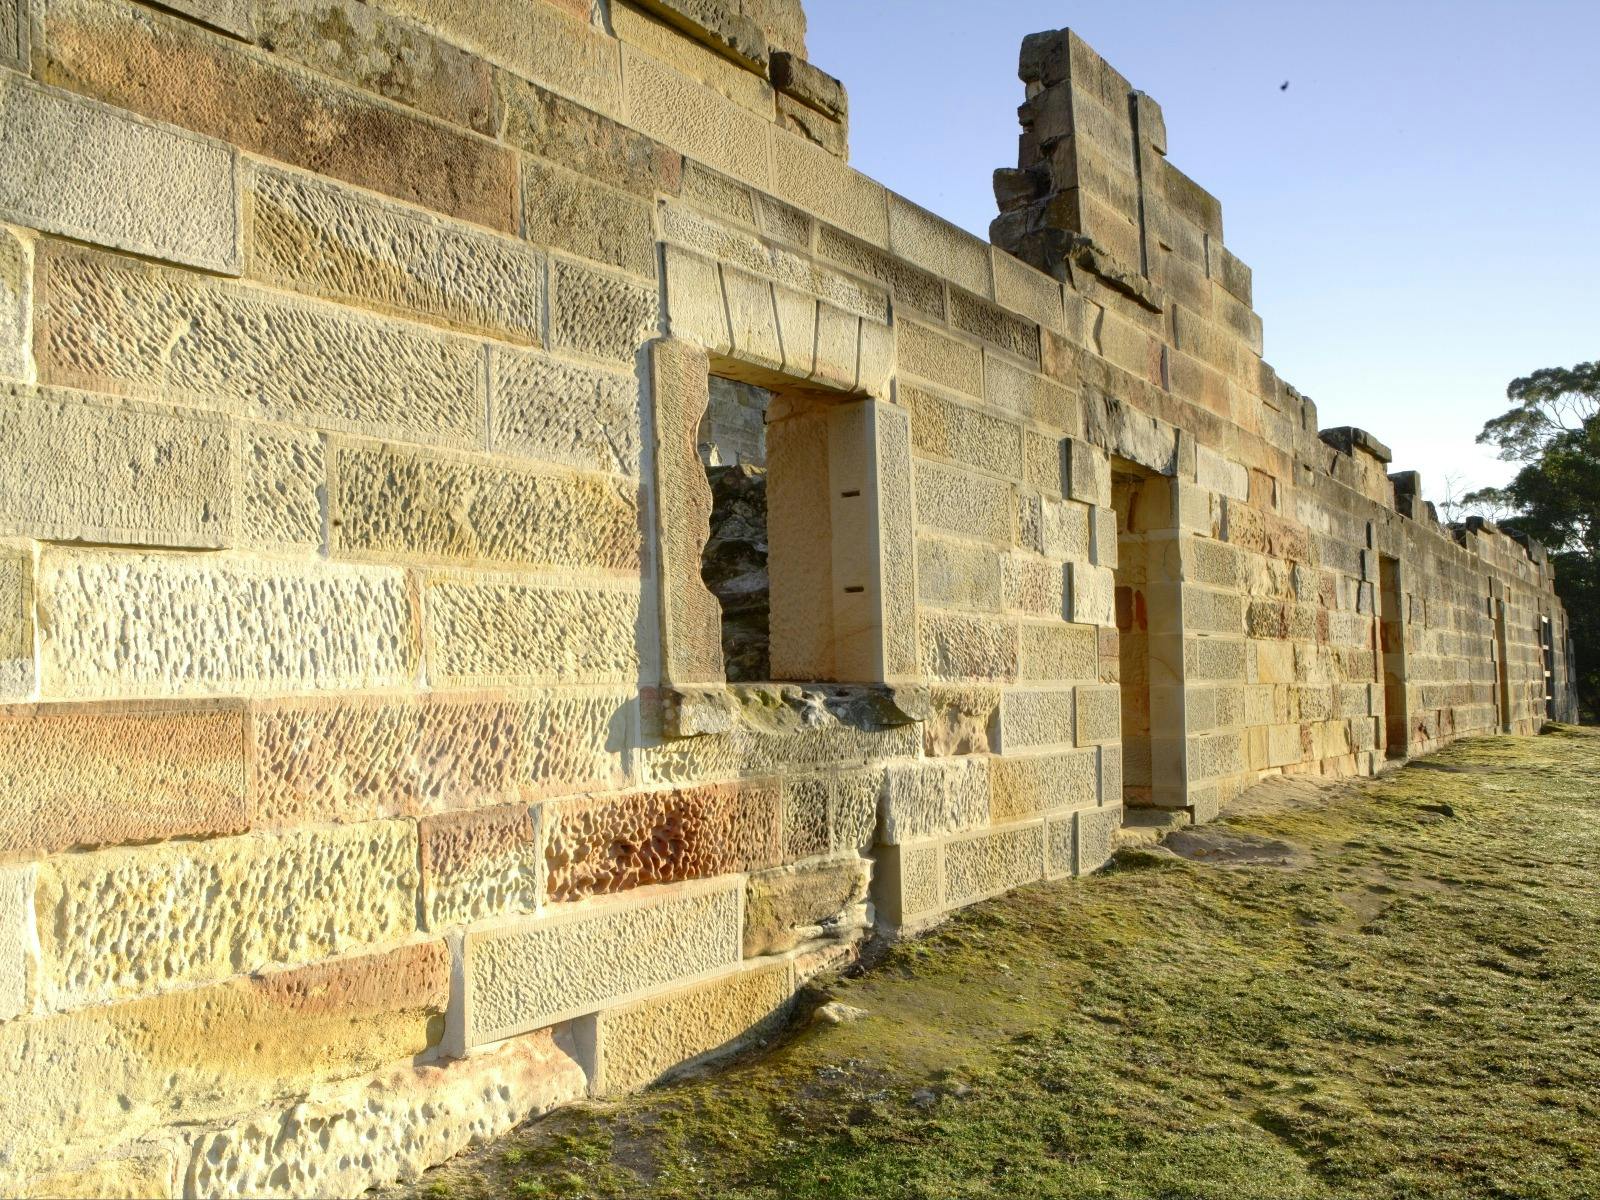 Detailed convict handmade sandstone outside wall of historic building